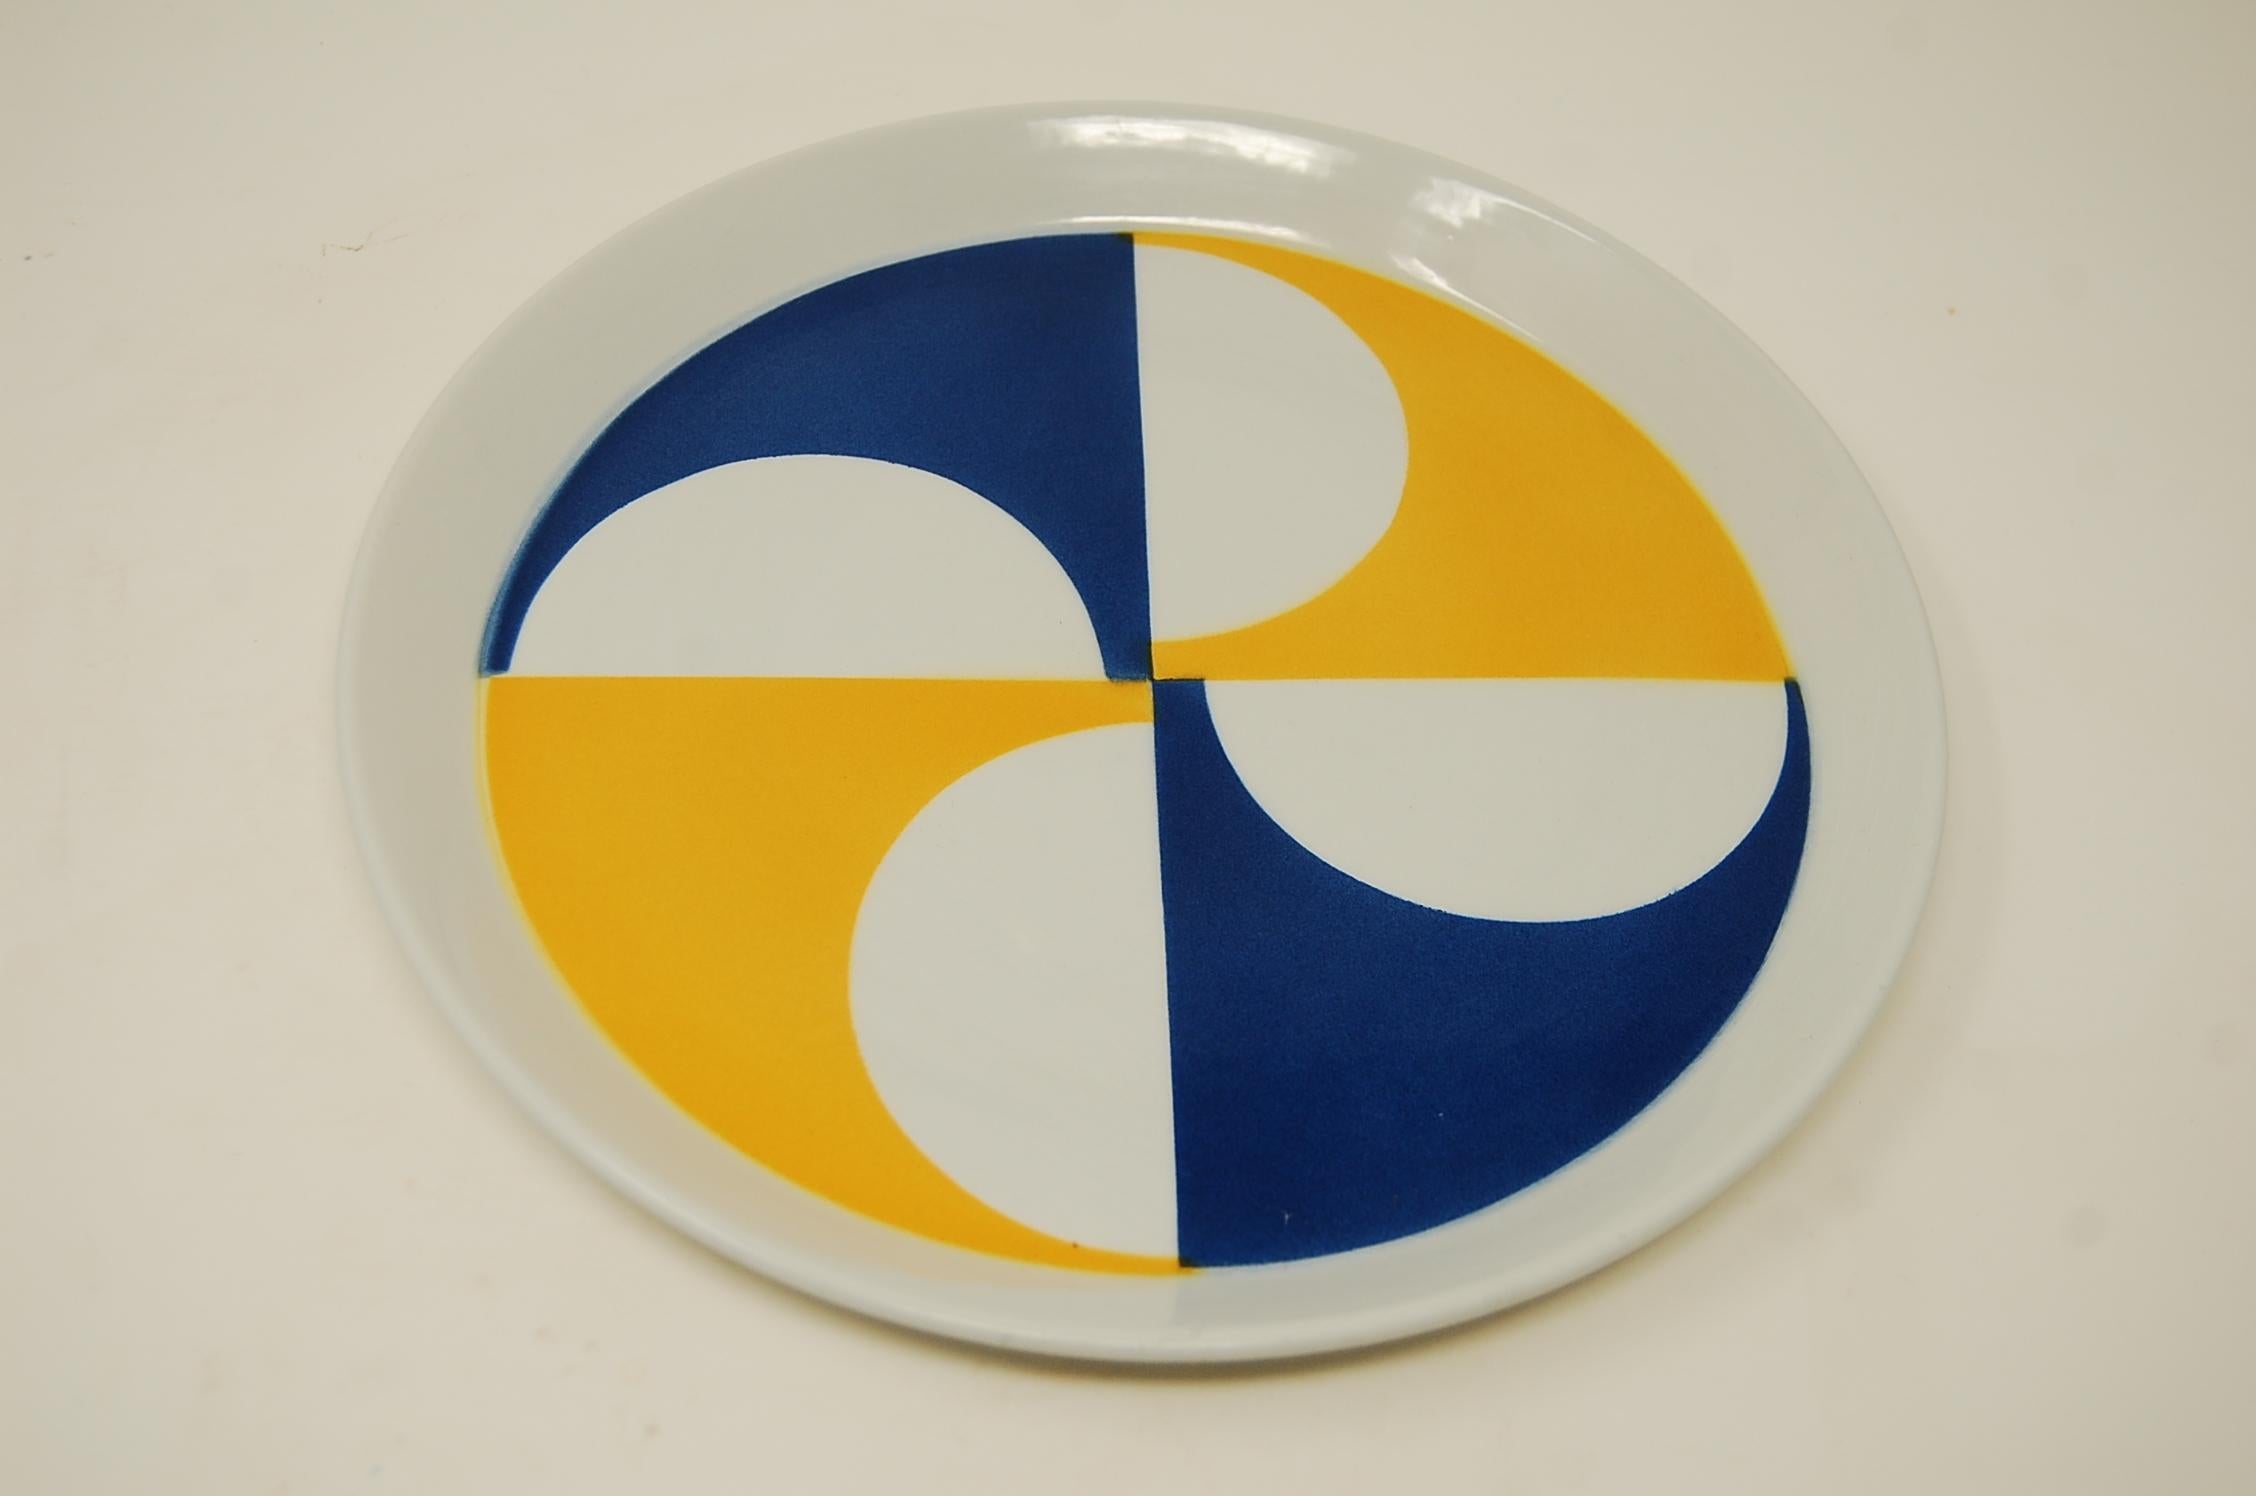 Rare set of ten plates designed by Gio Ponti as part of the 